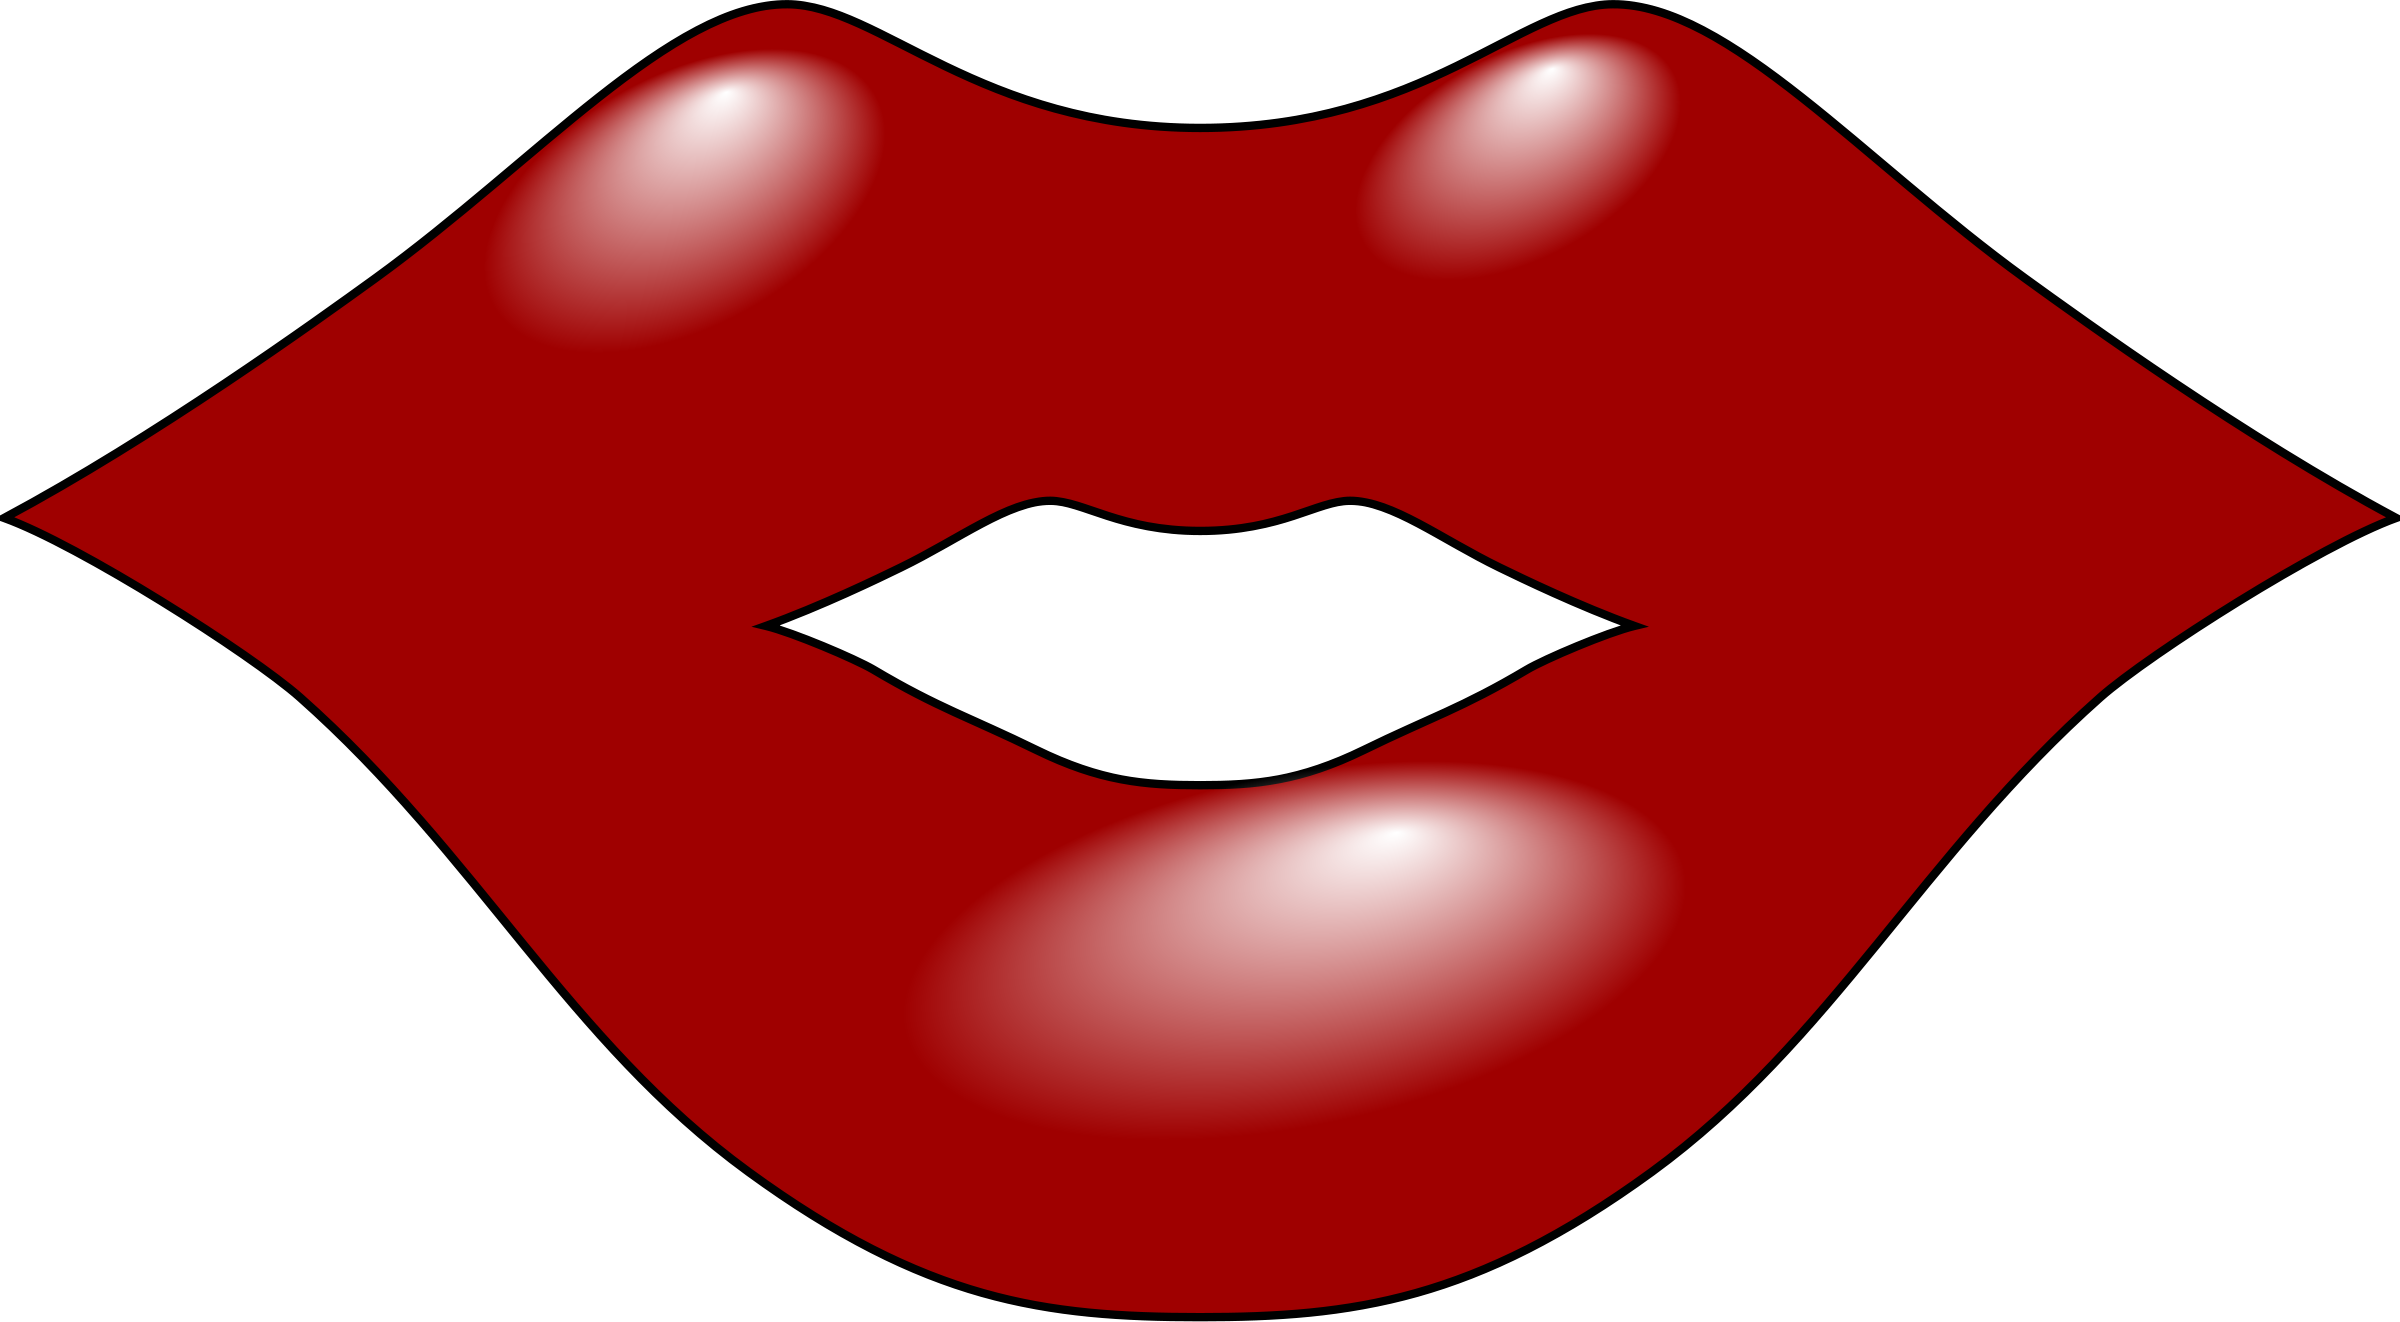 Lips clipart #11, Download drawings